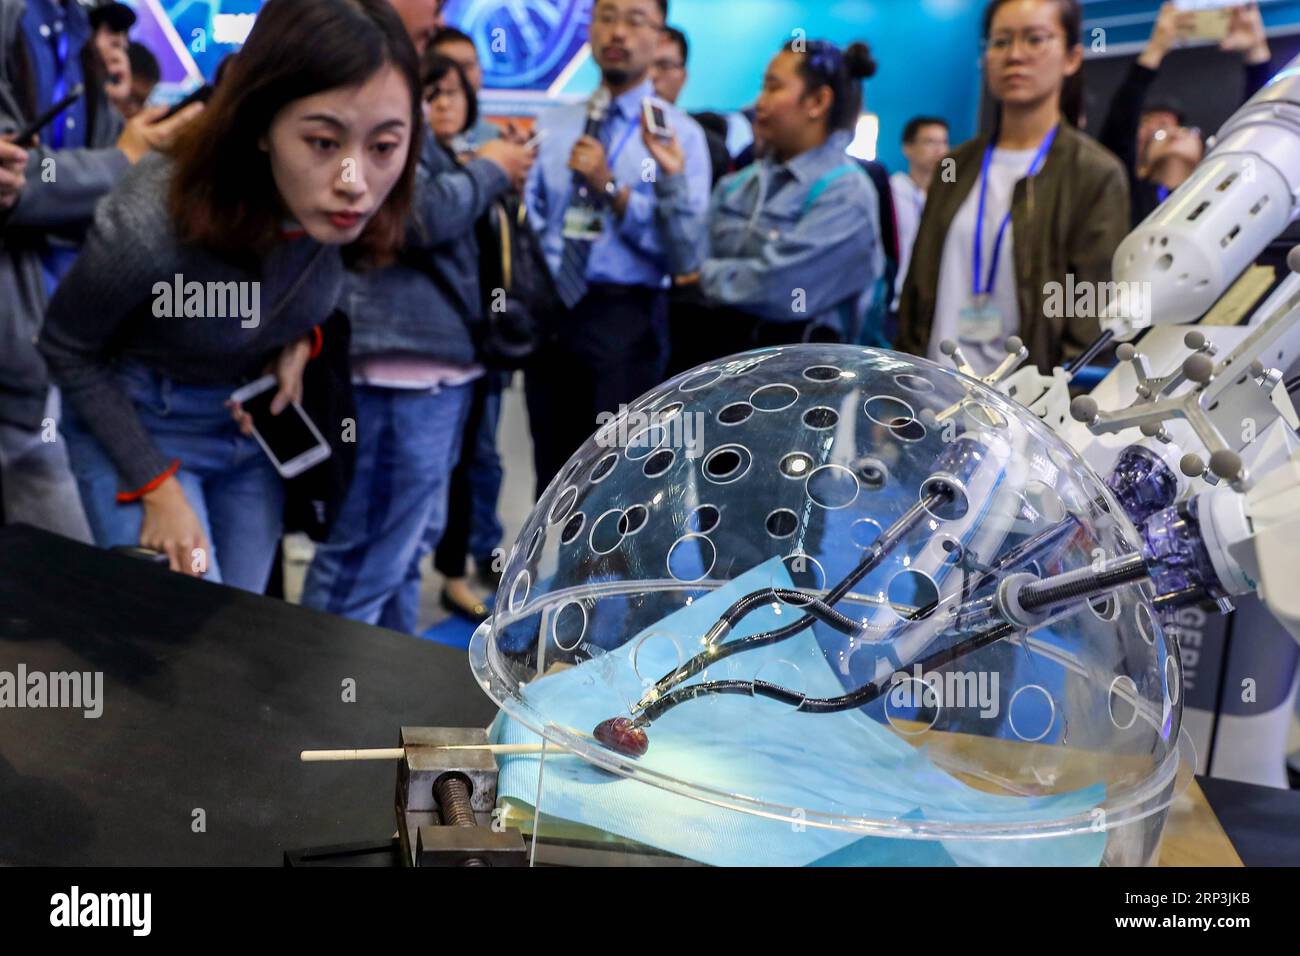 (181008) -- BEIJING, Oct. 8, 2018 -- Members of the press look at a porotic laparoscopic surgery robot system during a press preview of the 2018 National Mass Innovation and Entrepreneurship Week in Beijing, capital of China, Oct. 8, 2018. The weekly event will run from October 9 to 15. ) (lmm) CHINA-BEIJING-TECHNOLOGY-INNOVATION-ENTREPRENEURSHIP (CN) ZhangxYuwei PUBLICATIONxNOTxINxCHN Stock Photo